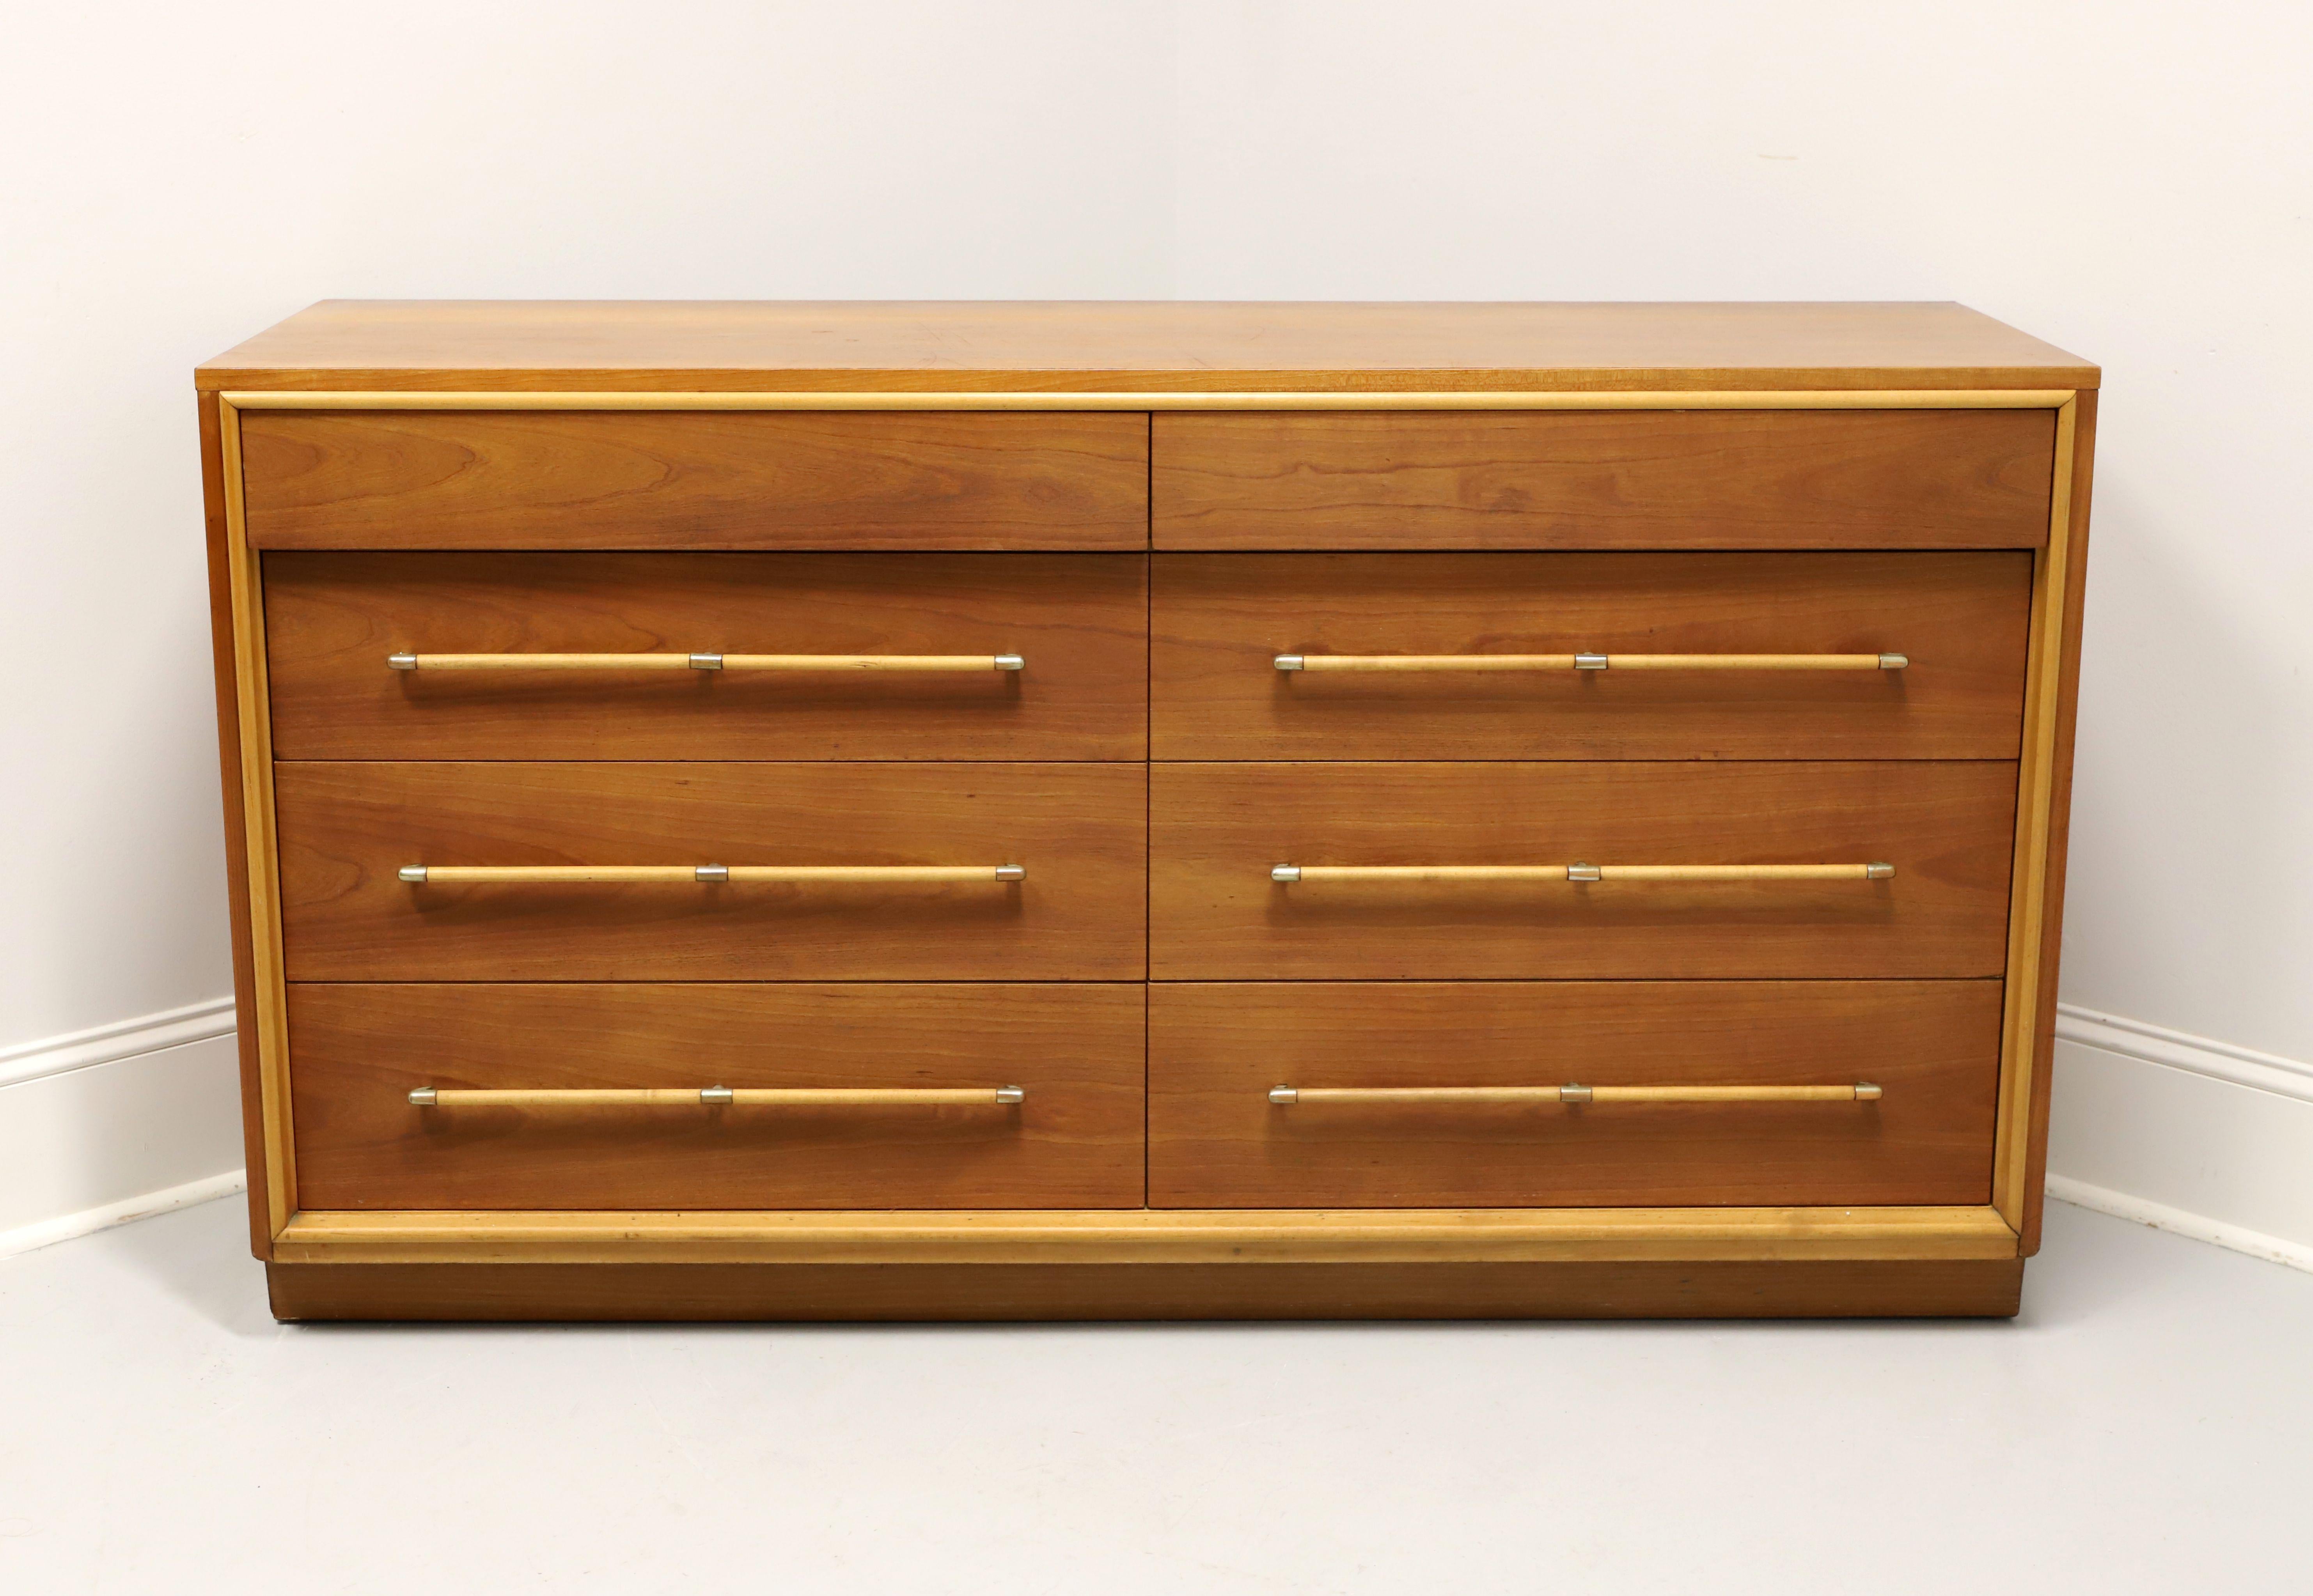 A Mid 20th Century Modern style double dresser by Heritage Henredon, a collaboration between Henredon and Drexel Heritage. Walnut with brass & walnut hardware, solid edge to the top, slightly recessed inward lower drawers, and a solid base. Features